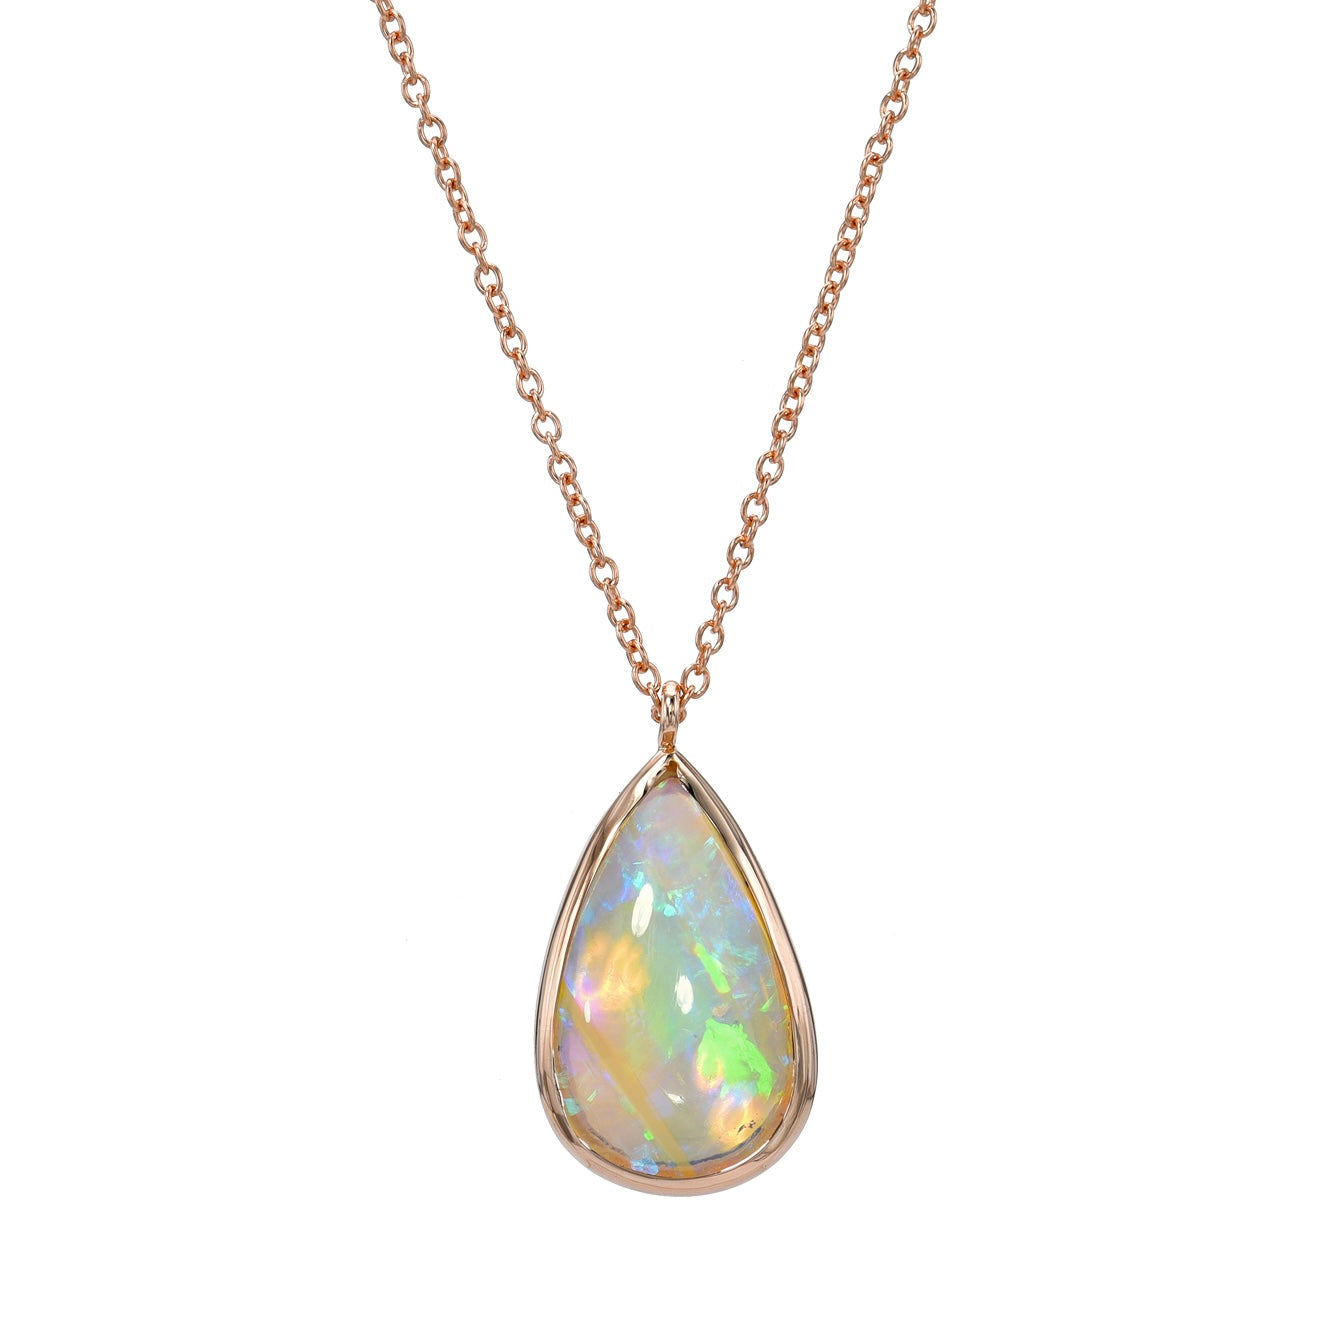 An Australian Opal Necklace by NIXIN Jewelry with a Crystal Opal set in rose gold.